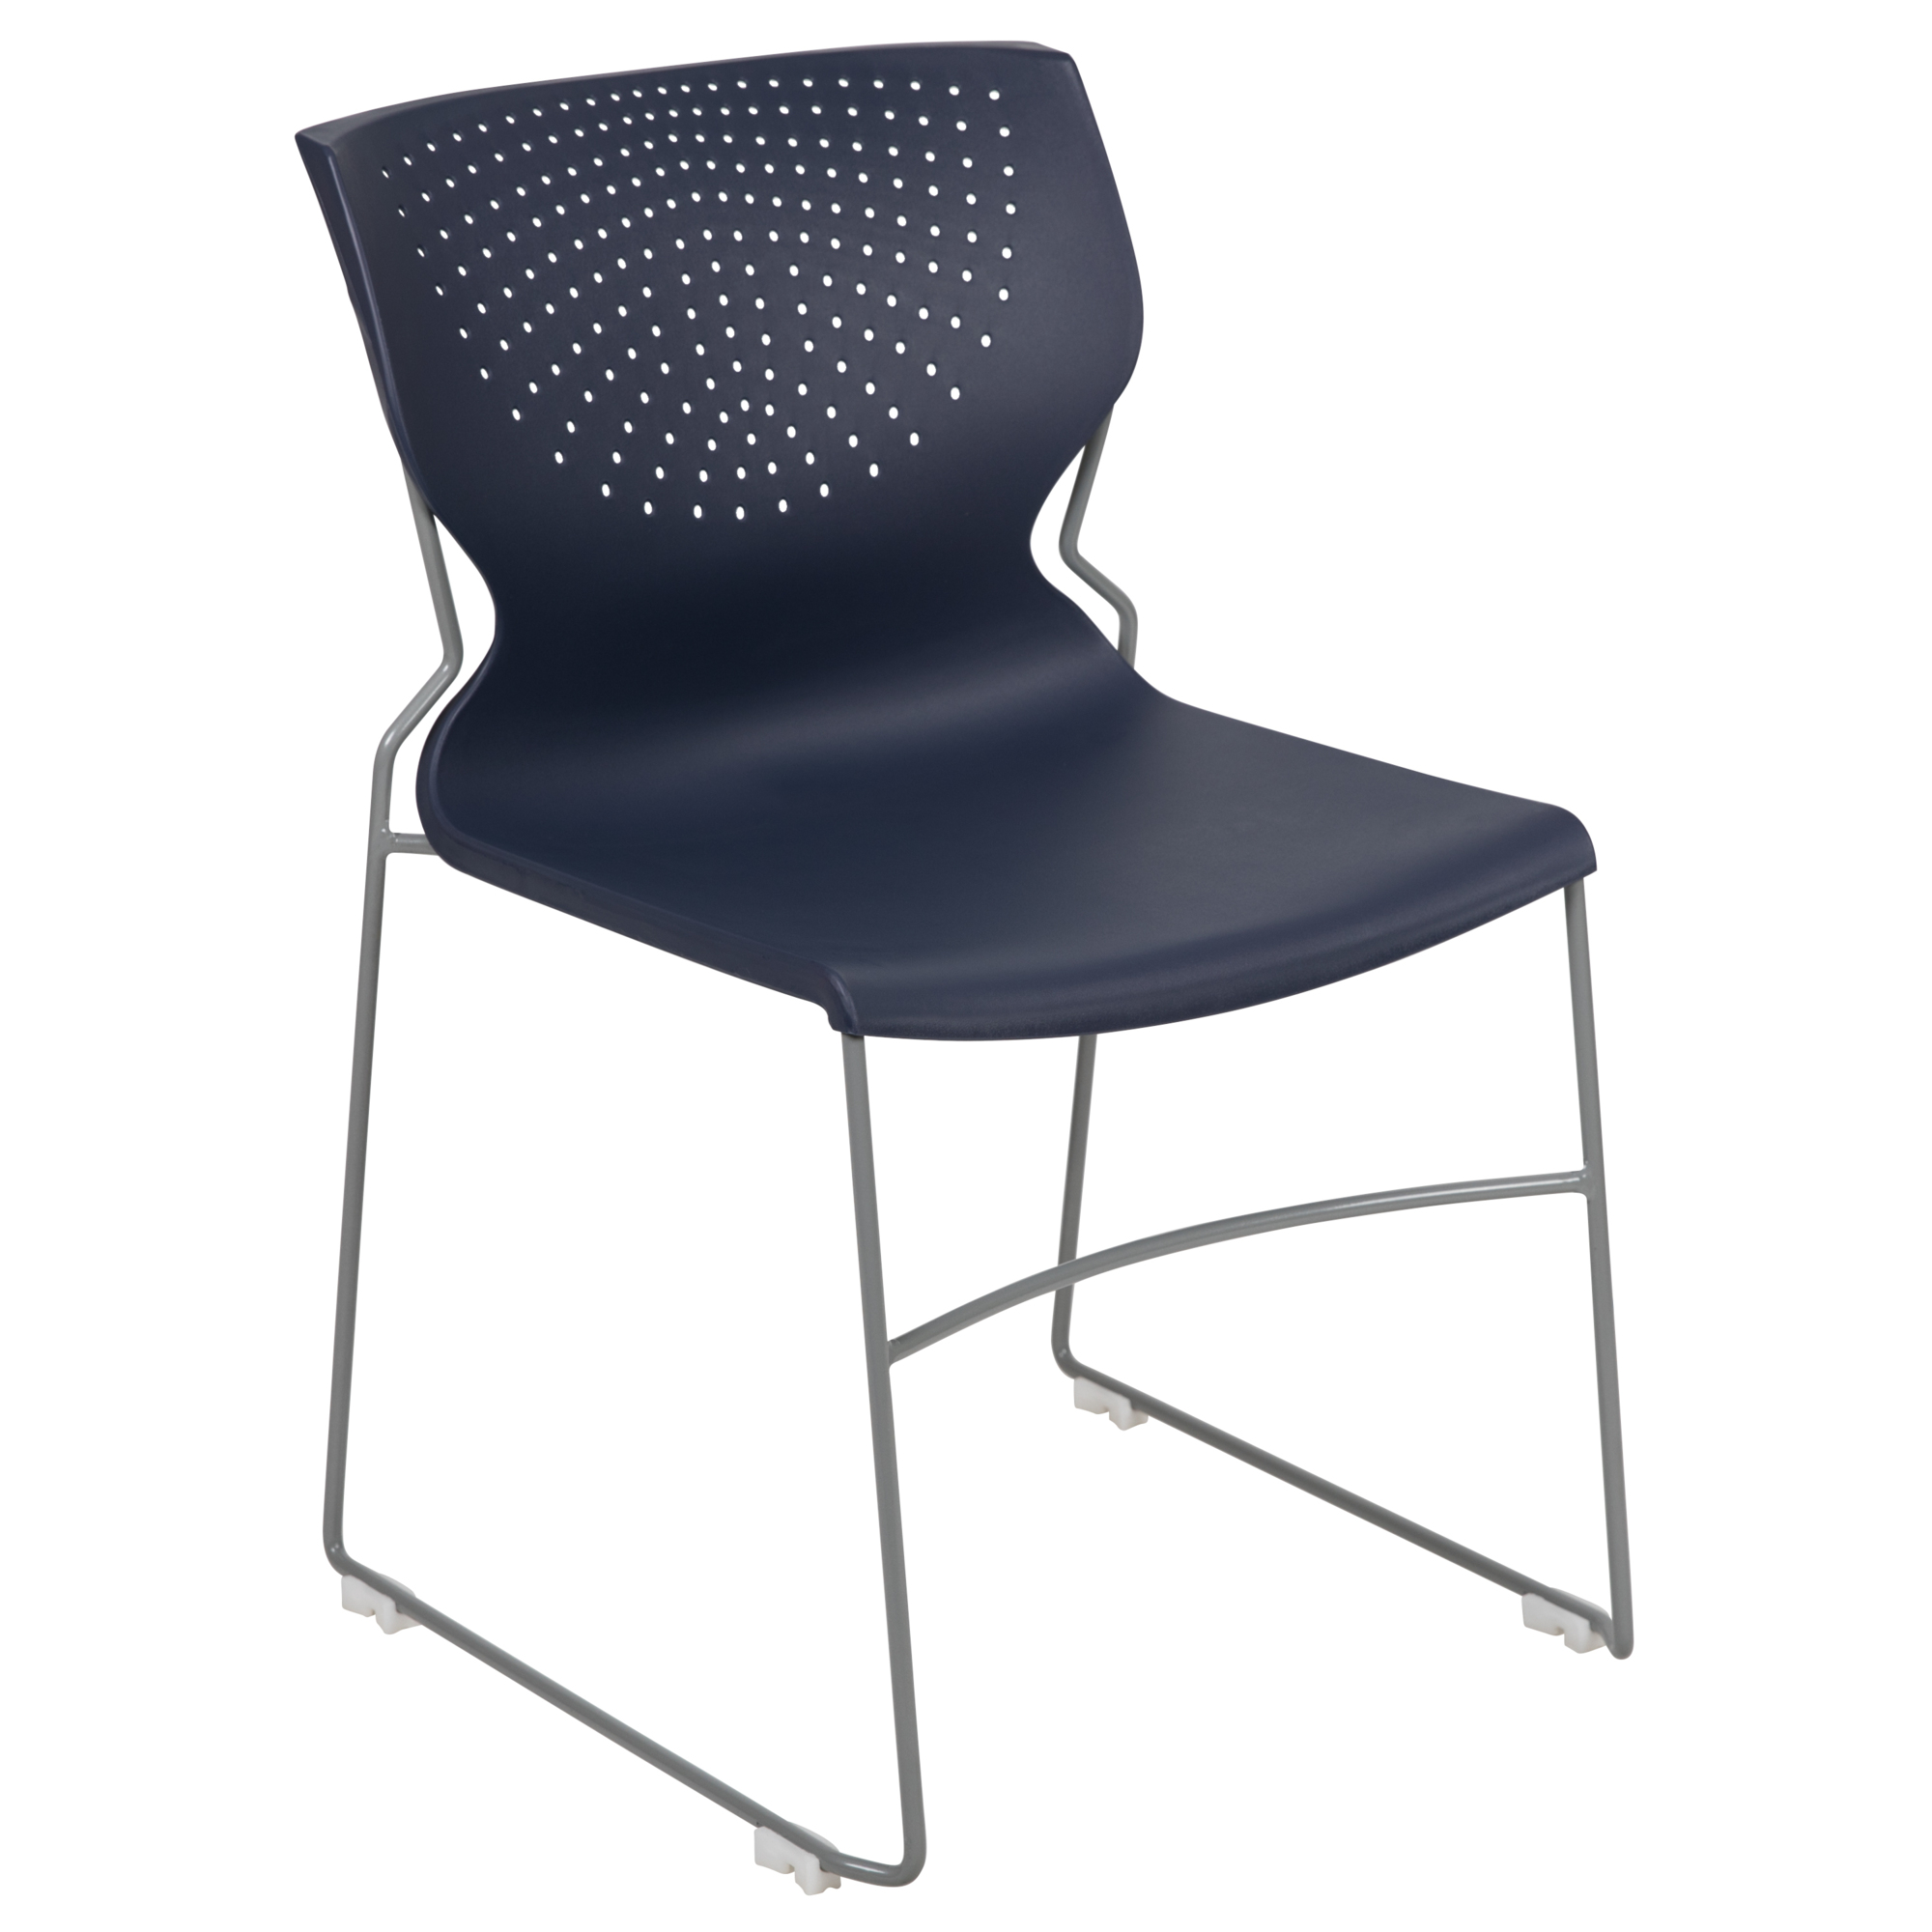 Flash Furniture, Navy Full Back Stack Chair with Gray Frame, Primary Color Blue, Included (qty.) 1, Model RUT438NY